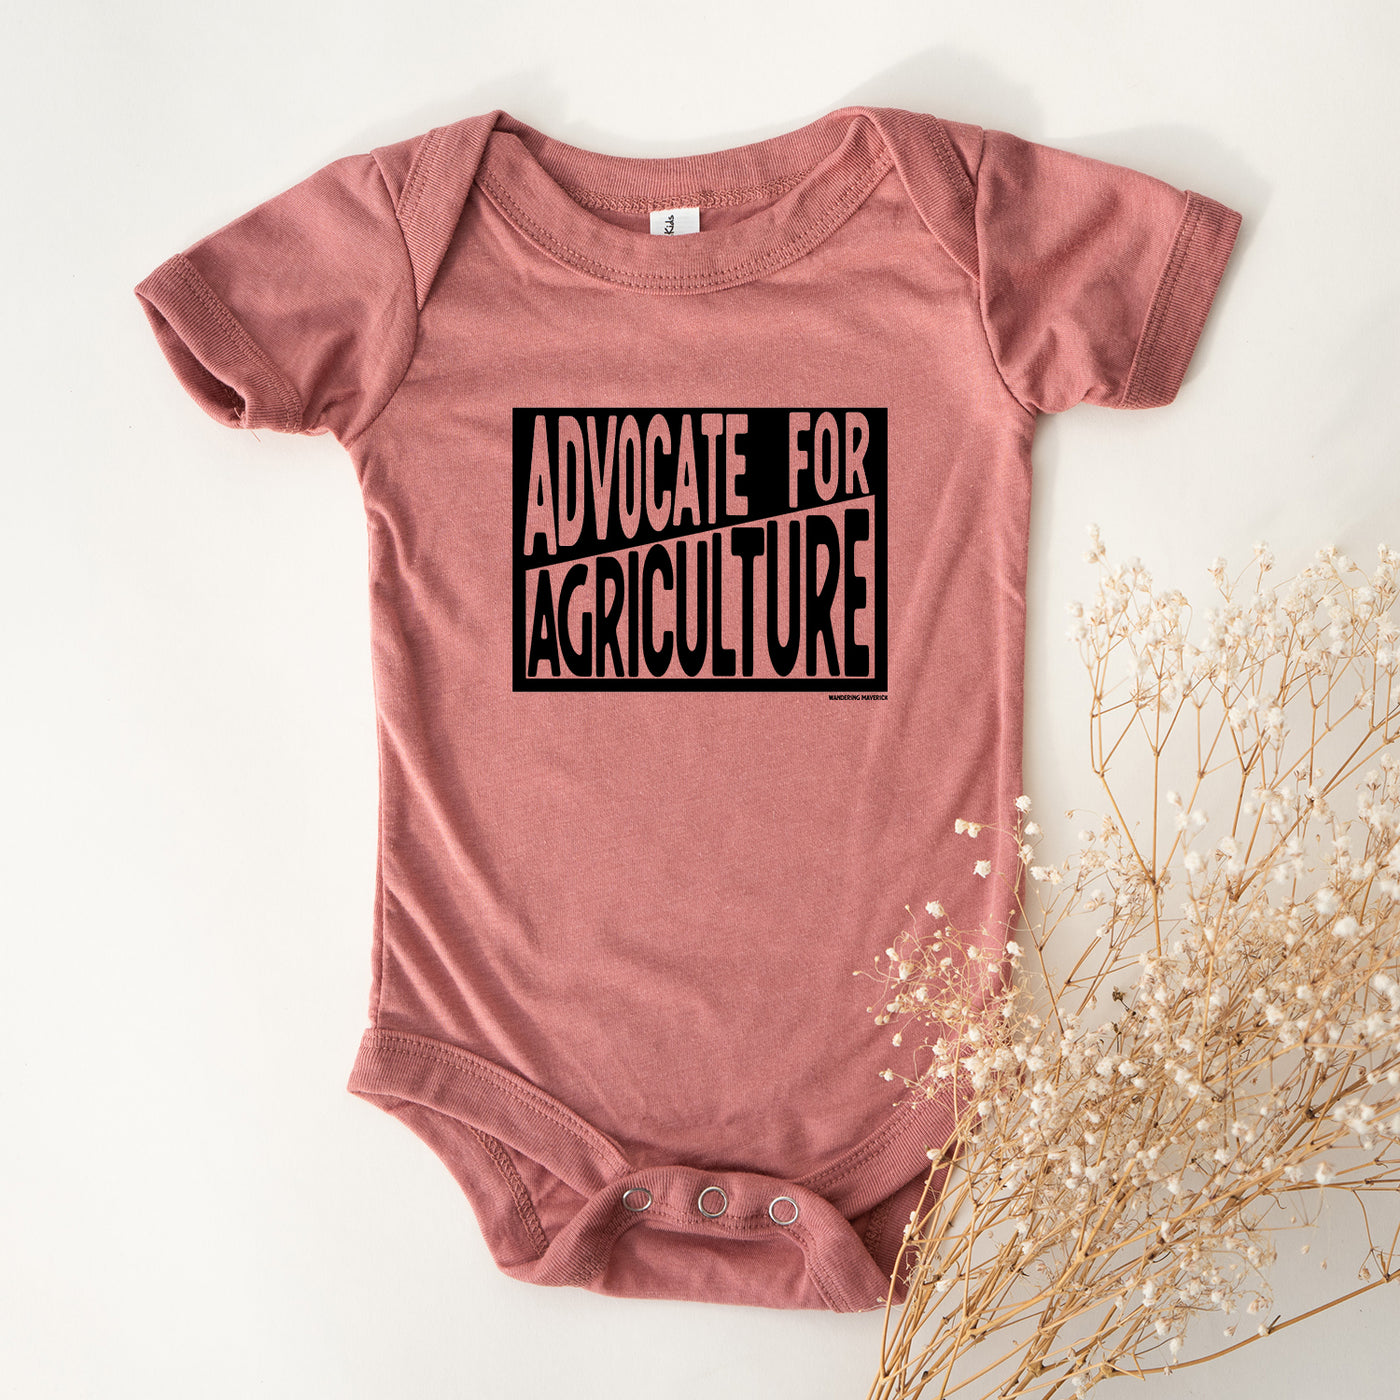 Block Advocate for Agriculture Black Ink One Piece/T-Shirt (Newborn - Youth XL) - Multiple Colors!